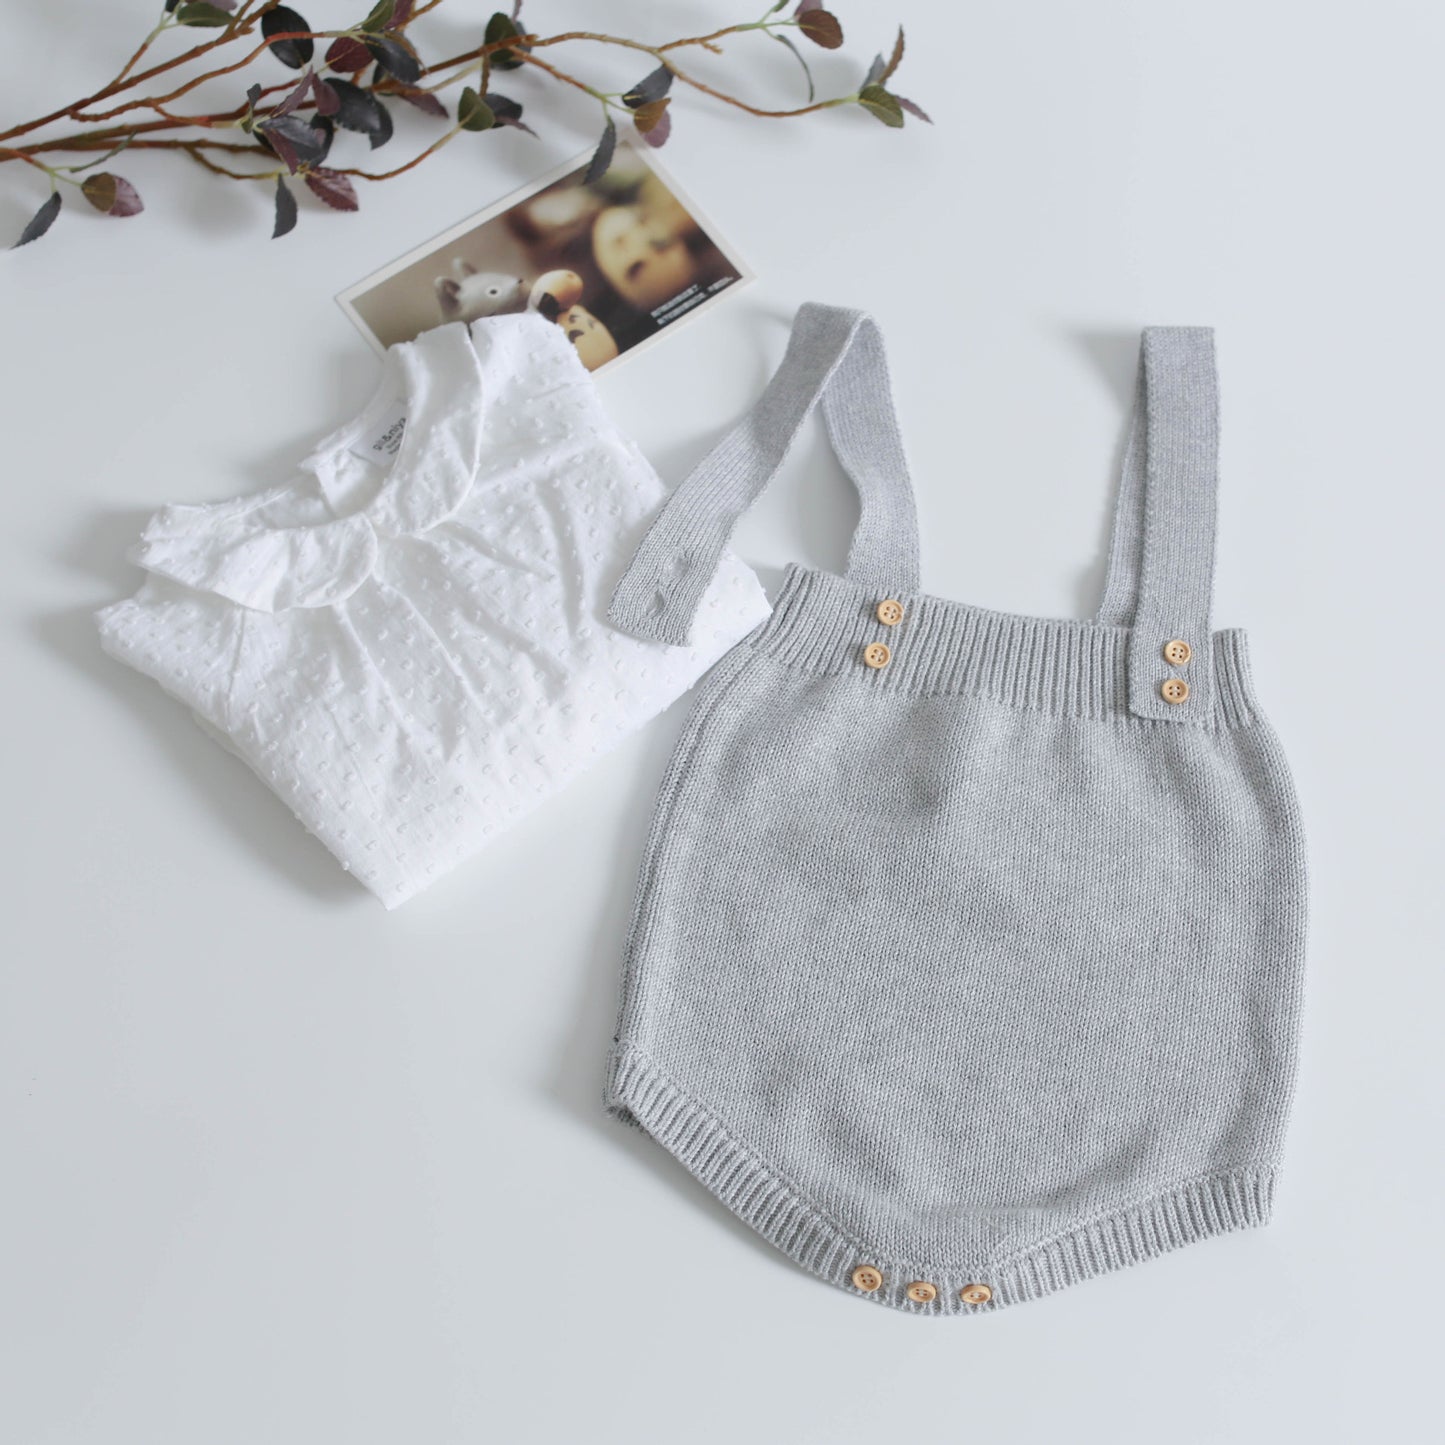 Adorable Baby Overall Set for Summer